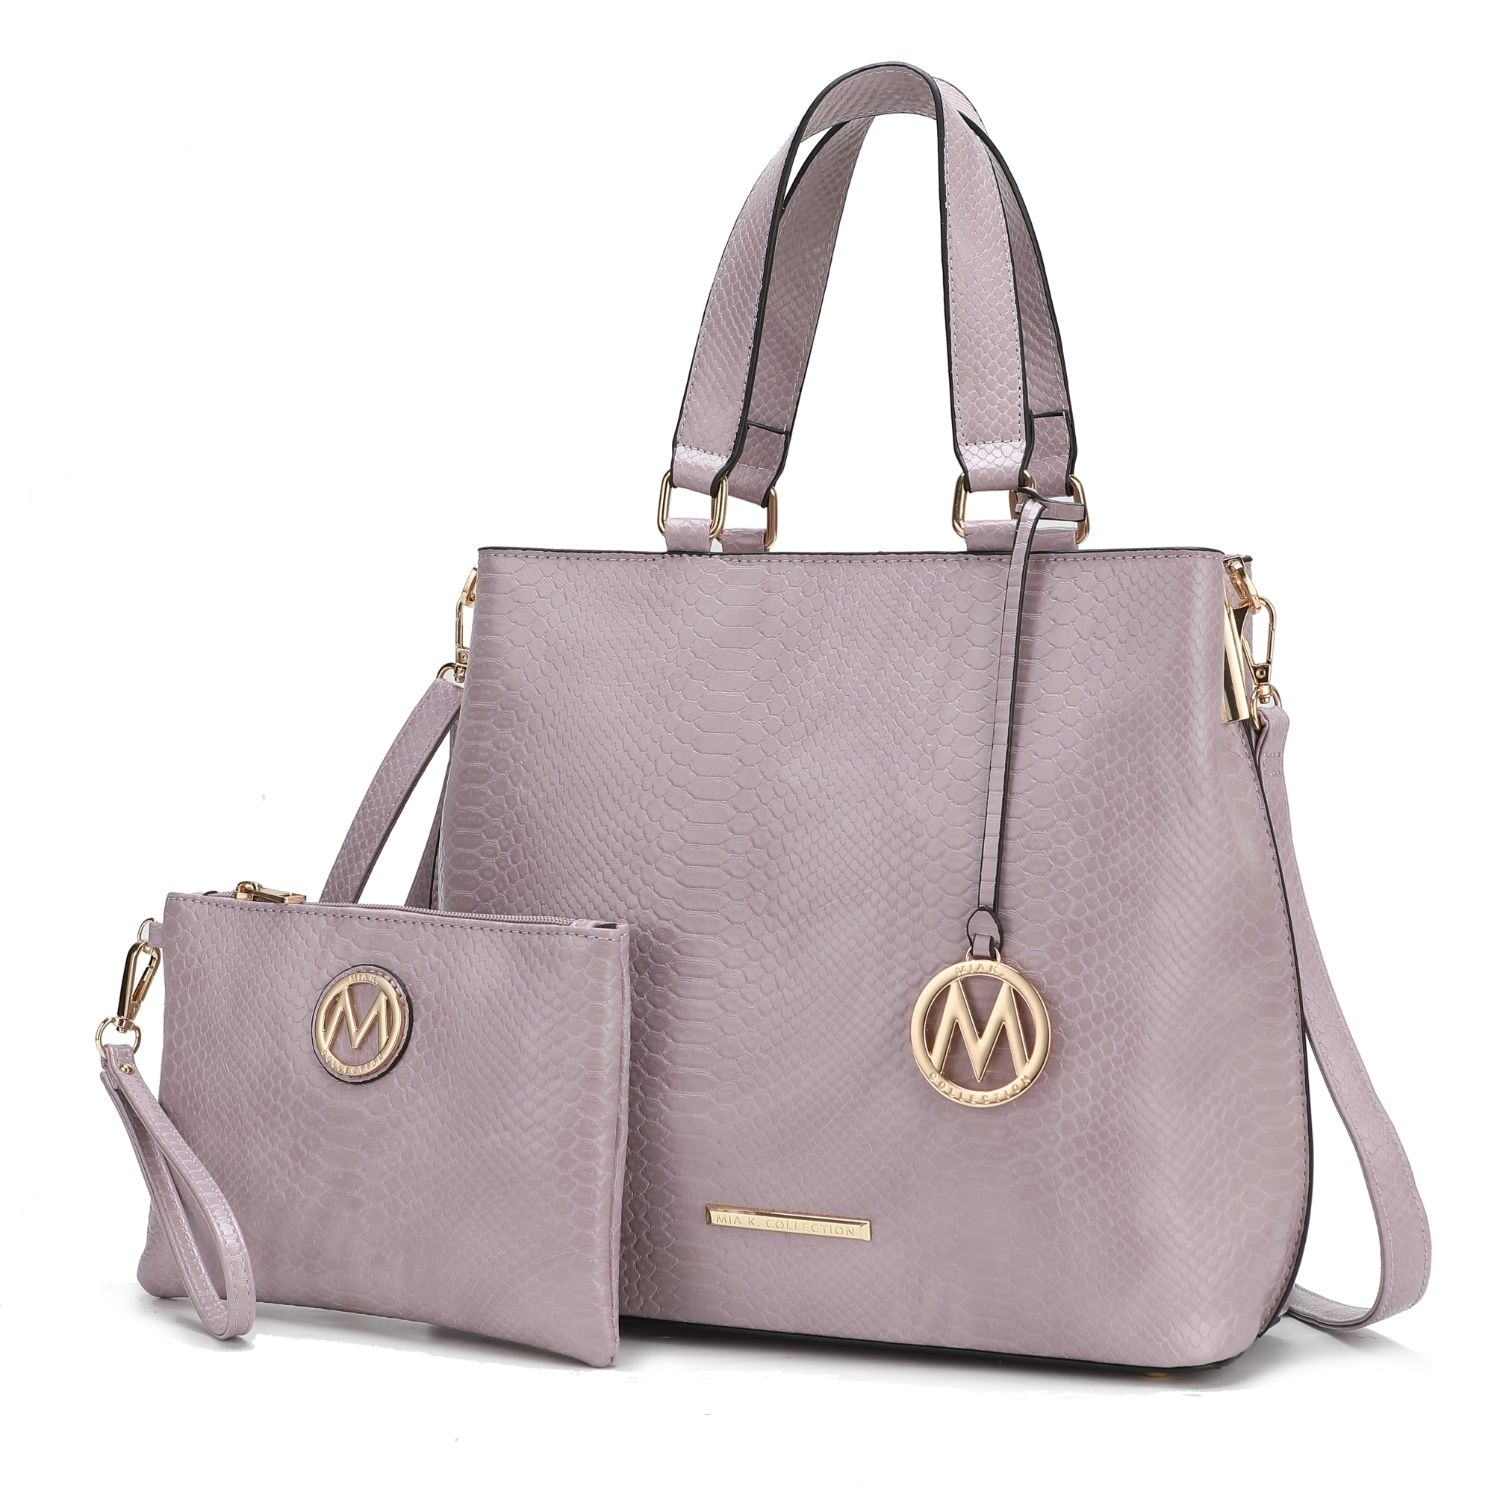 MKF Collection Beryl Snake-embossed Vegan Leather Women's Tote Bag With Wristlet - 2 Pieces, By Mia K - Lilac